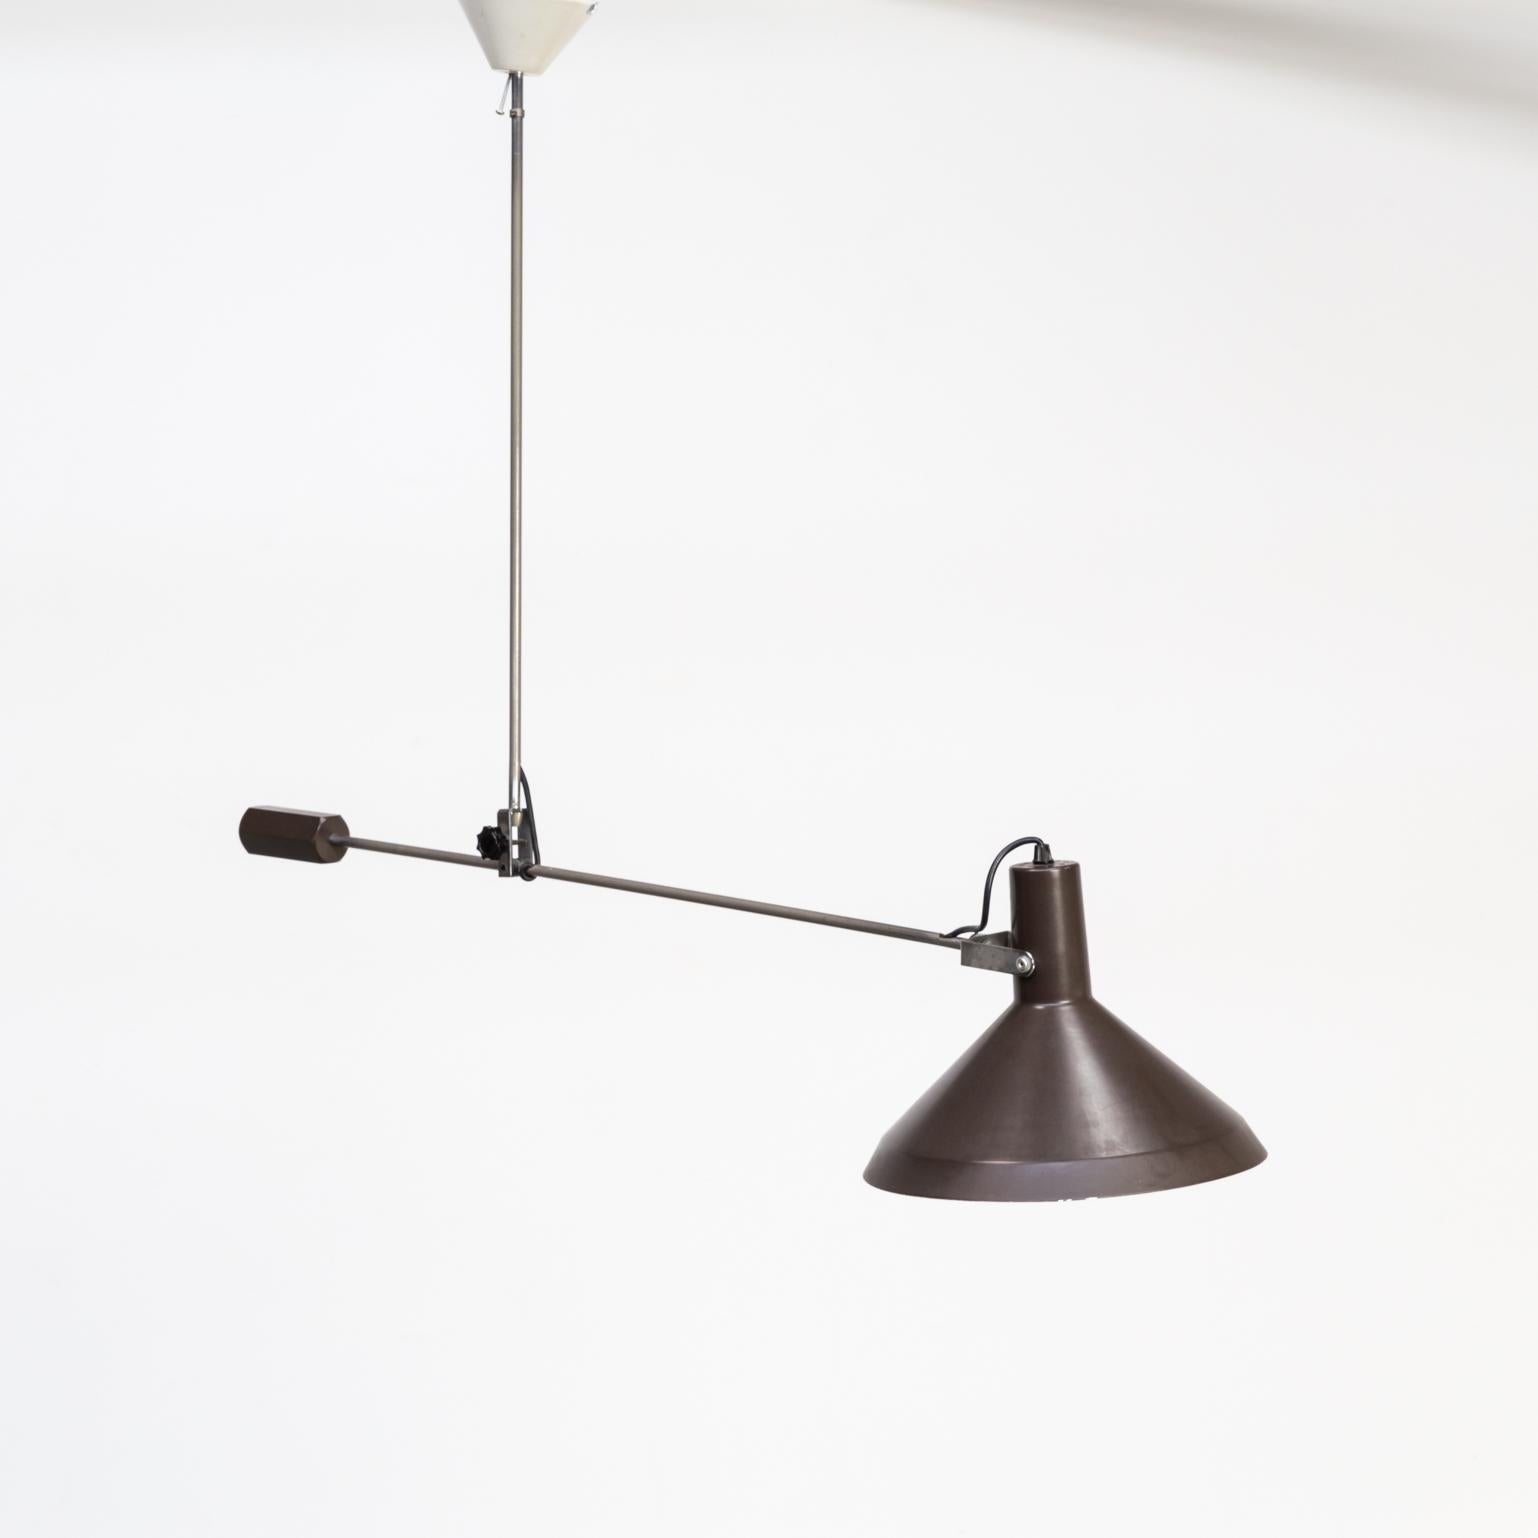 Late 20th Century 1970s Counterbalance Hanging Lamp For Sale